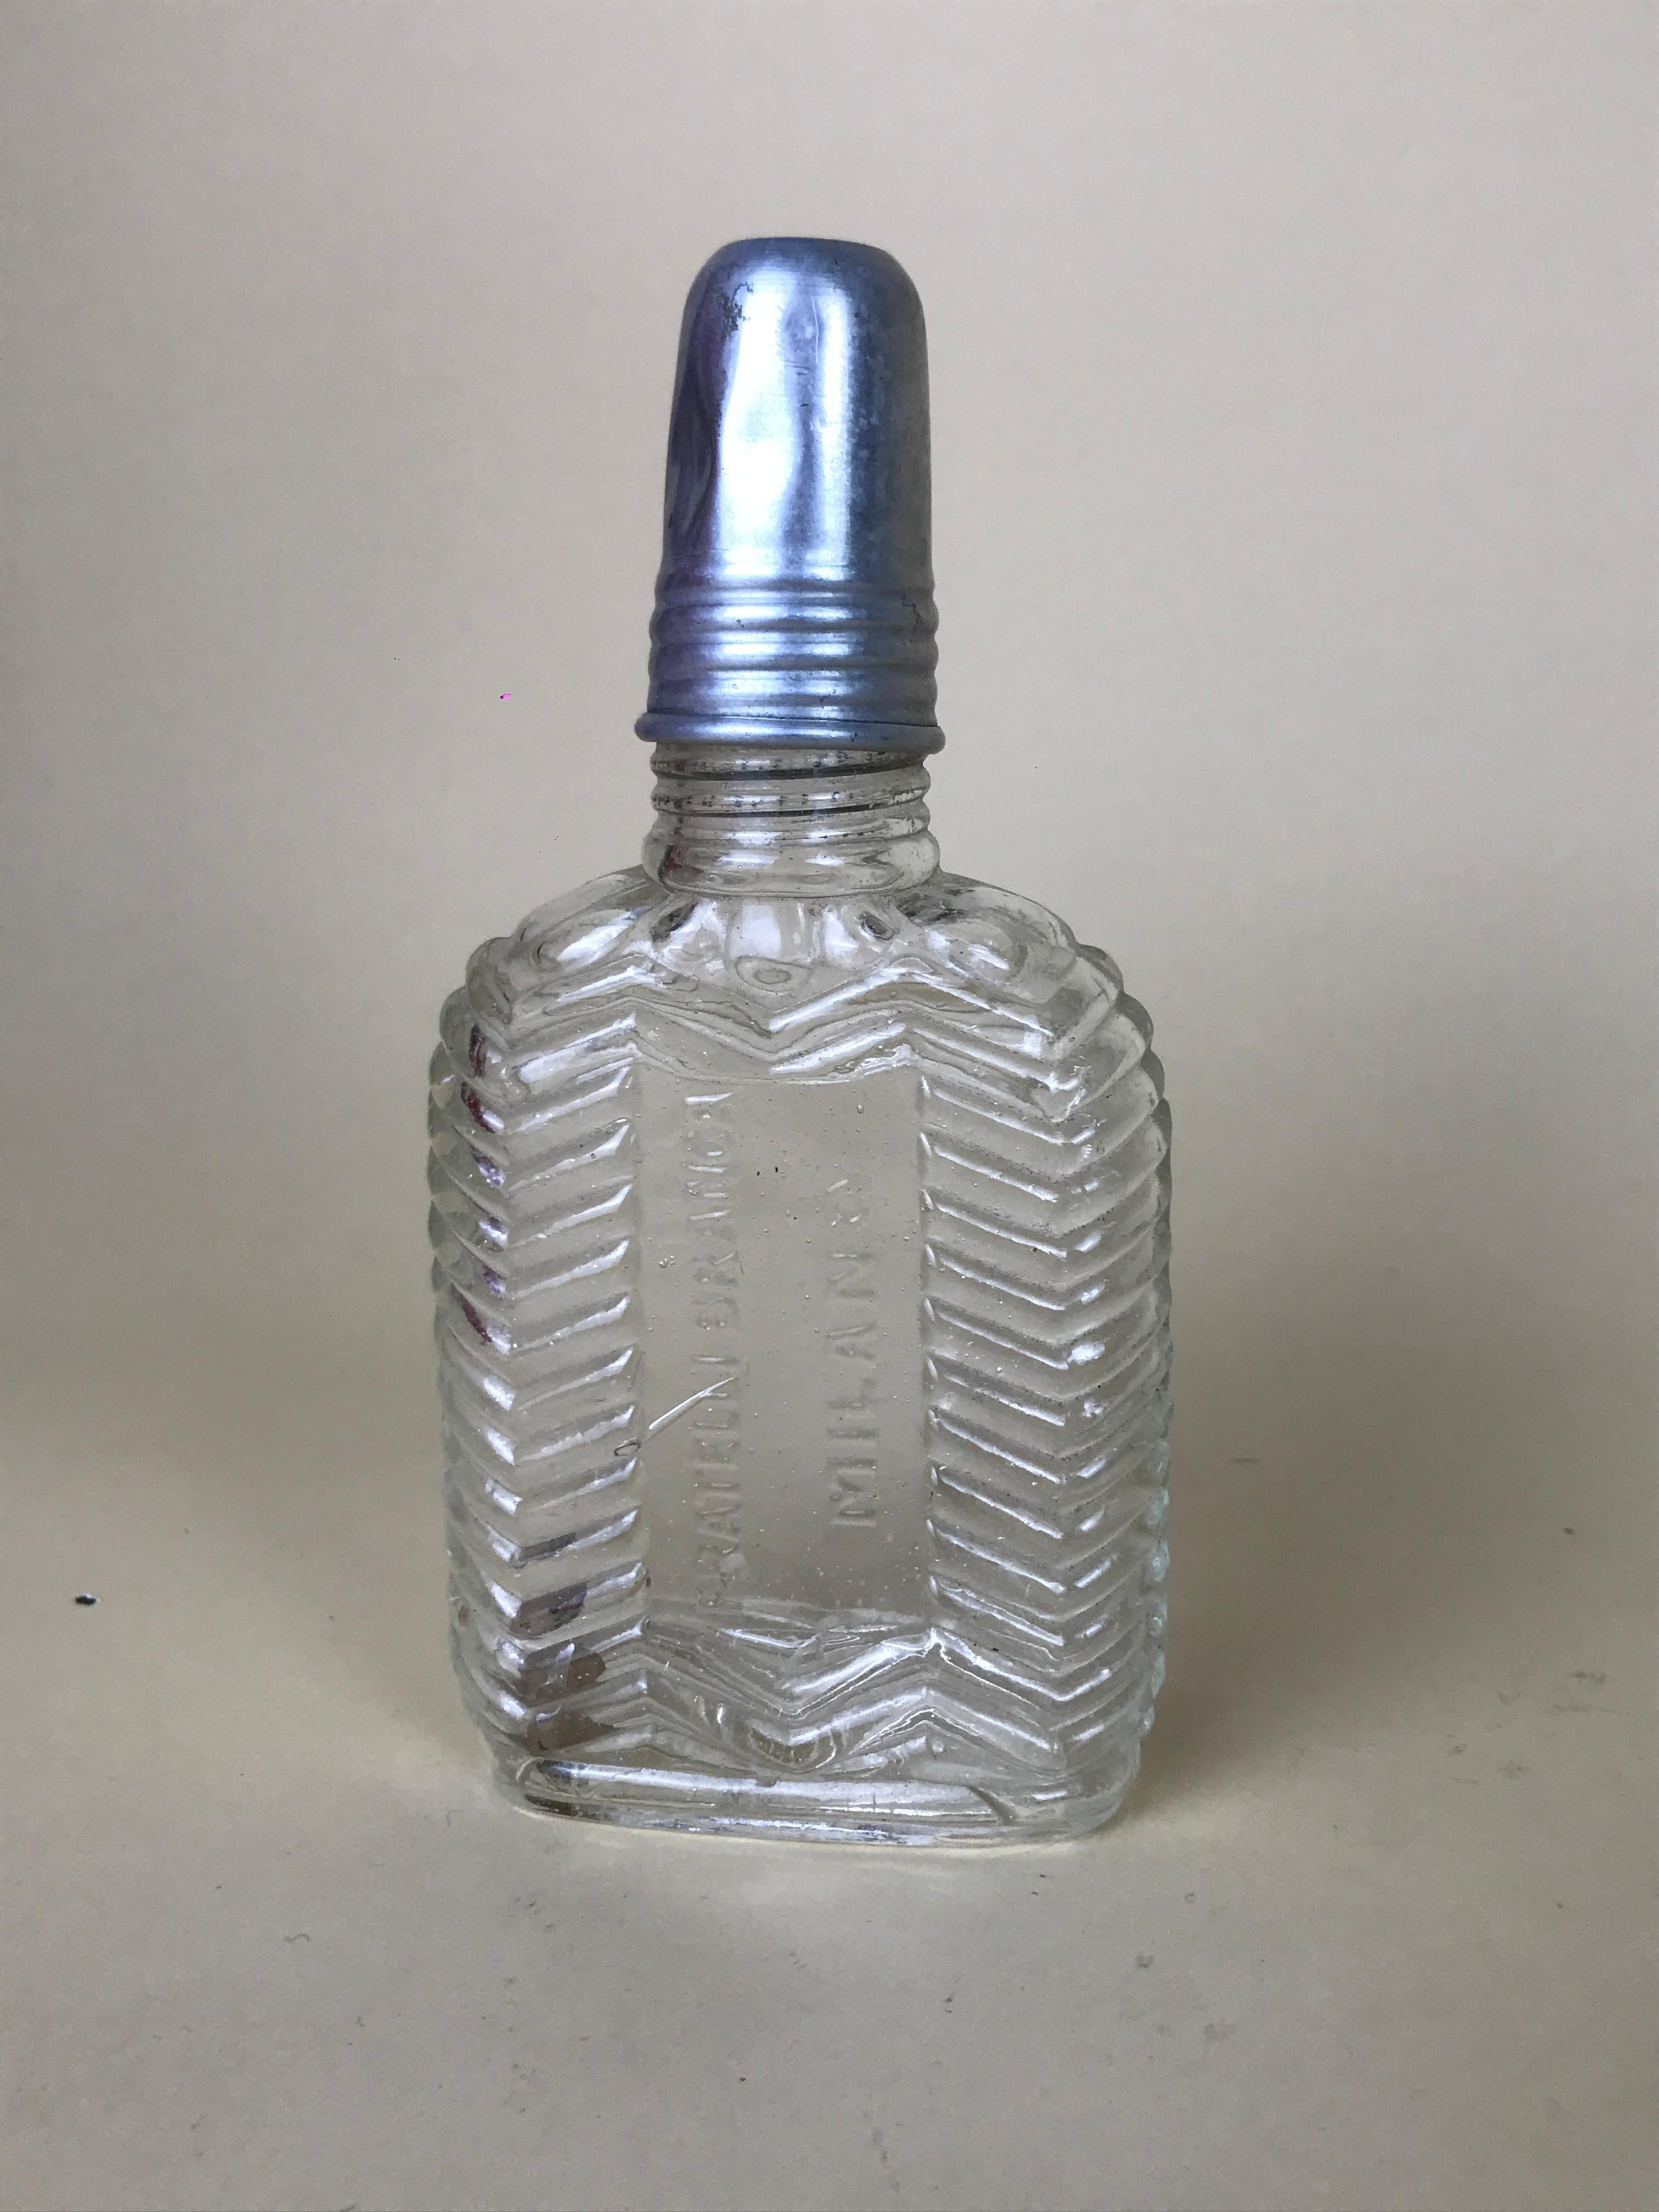 1950s Rare Vintage Italian Fratelli Branca Milano Glass Flask with Aluminium Cup For Sale 2